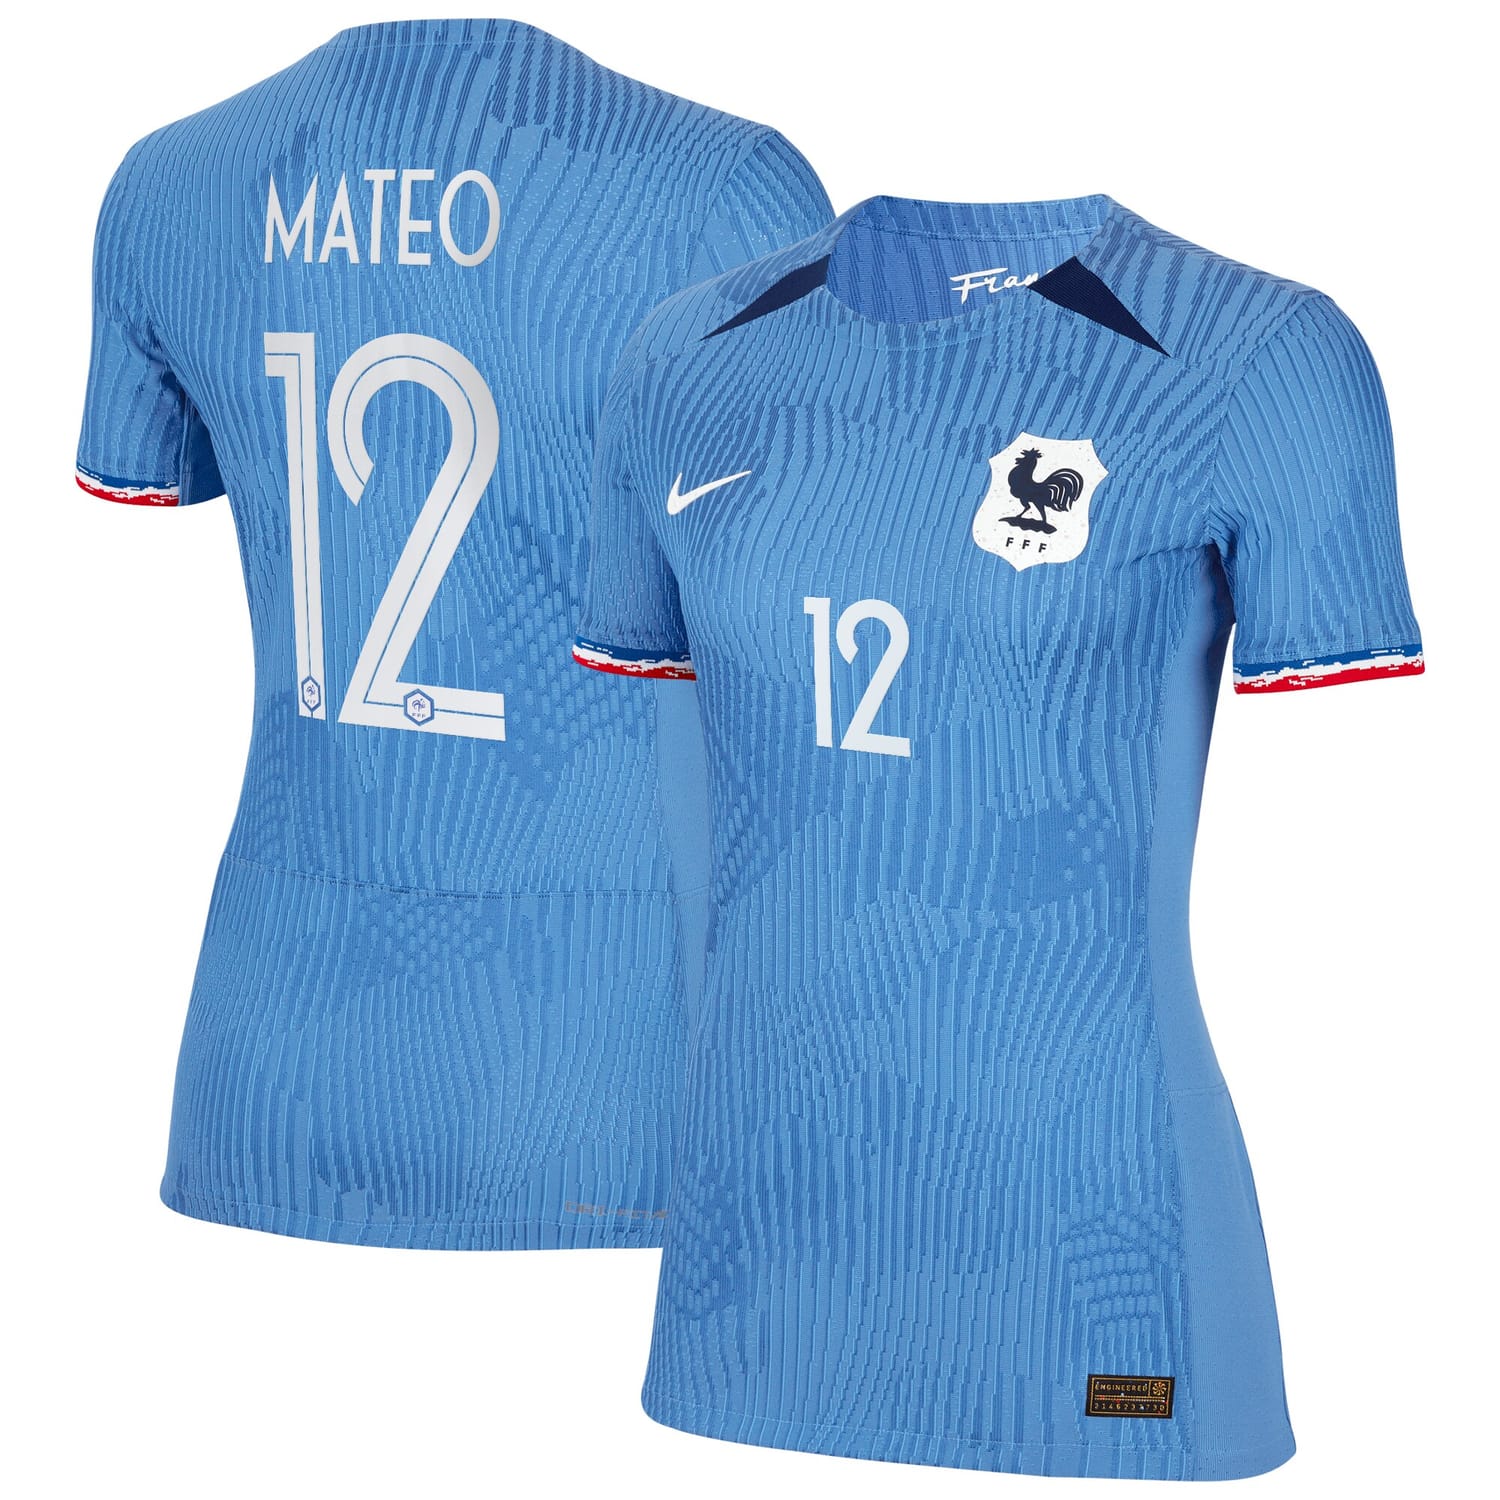 France National Team Home Authentic Jersey Shirt 2023-24 player Clara Matéo 12 printing for Women